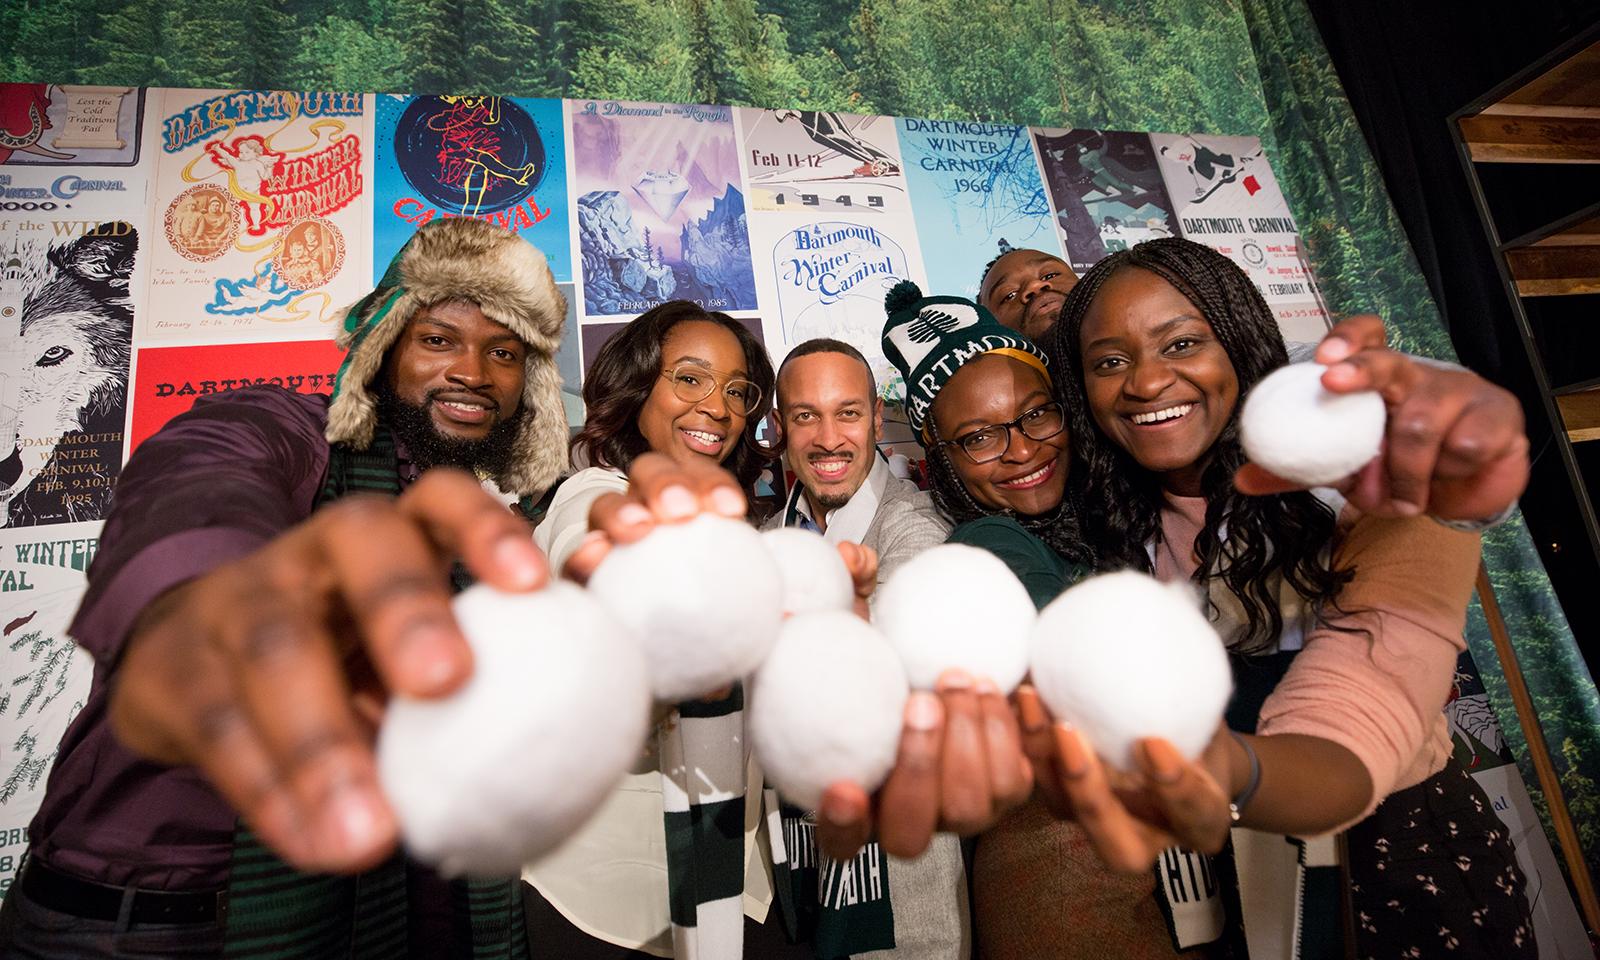 A group of happy people hold fake snowballs